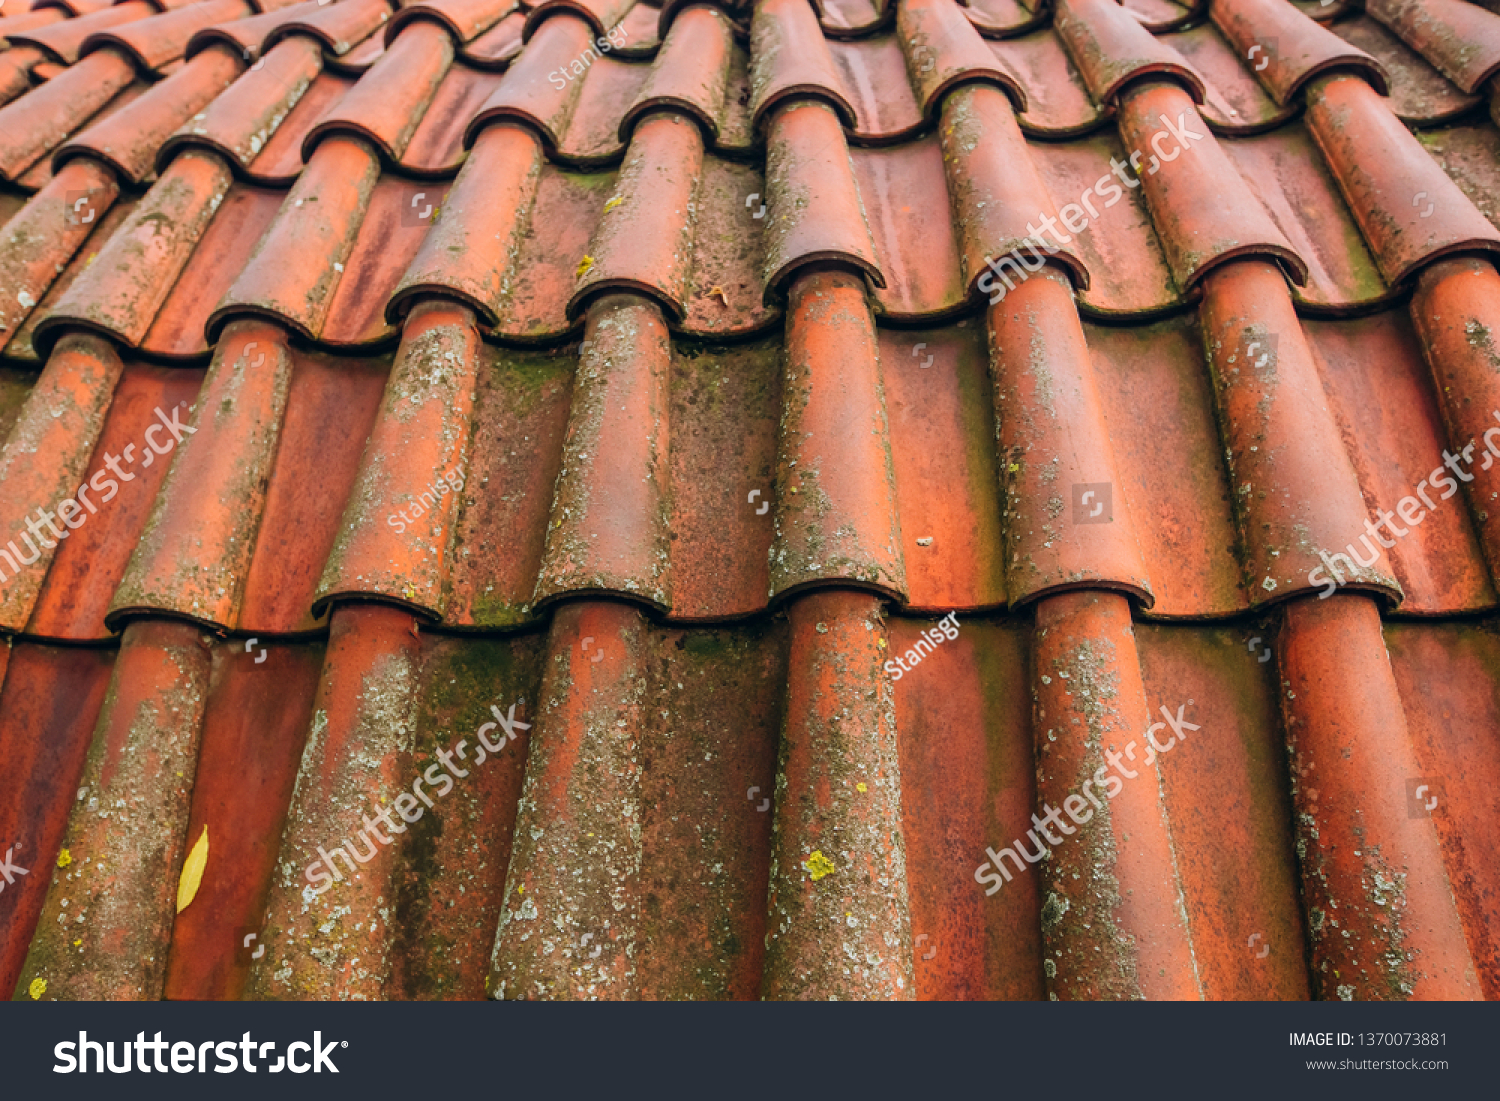 Exterior of brick house with red roof tiles, Prague. Retro red tile roof of old house #1370073881